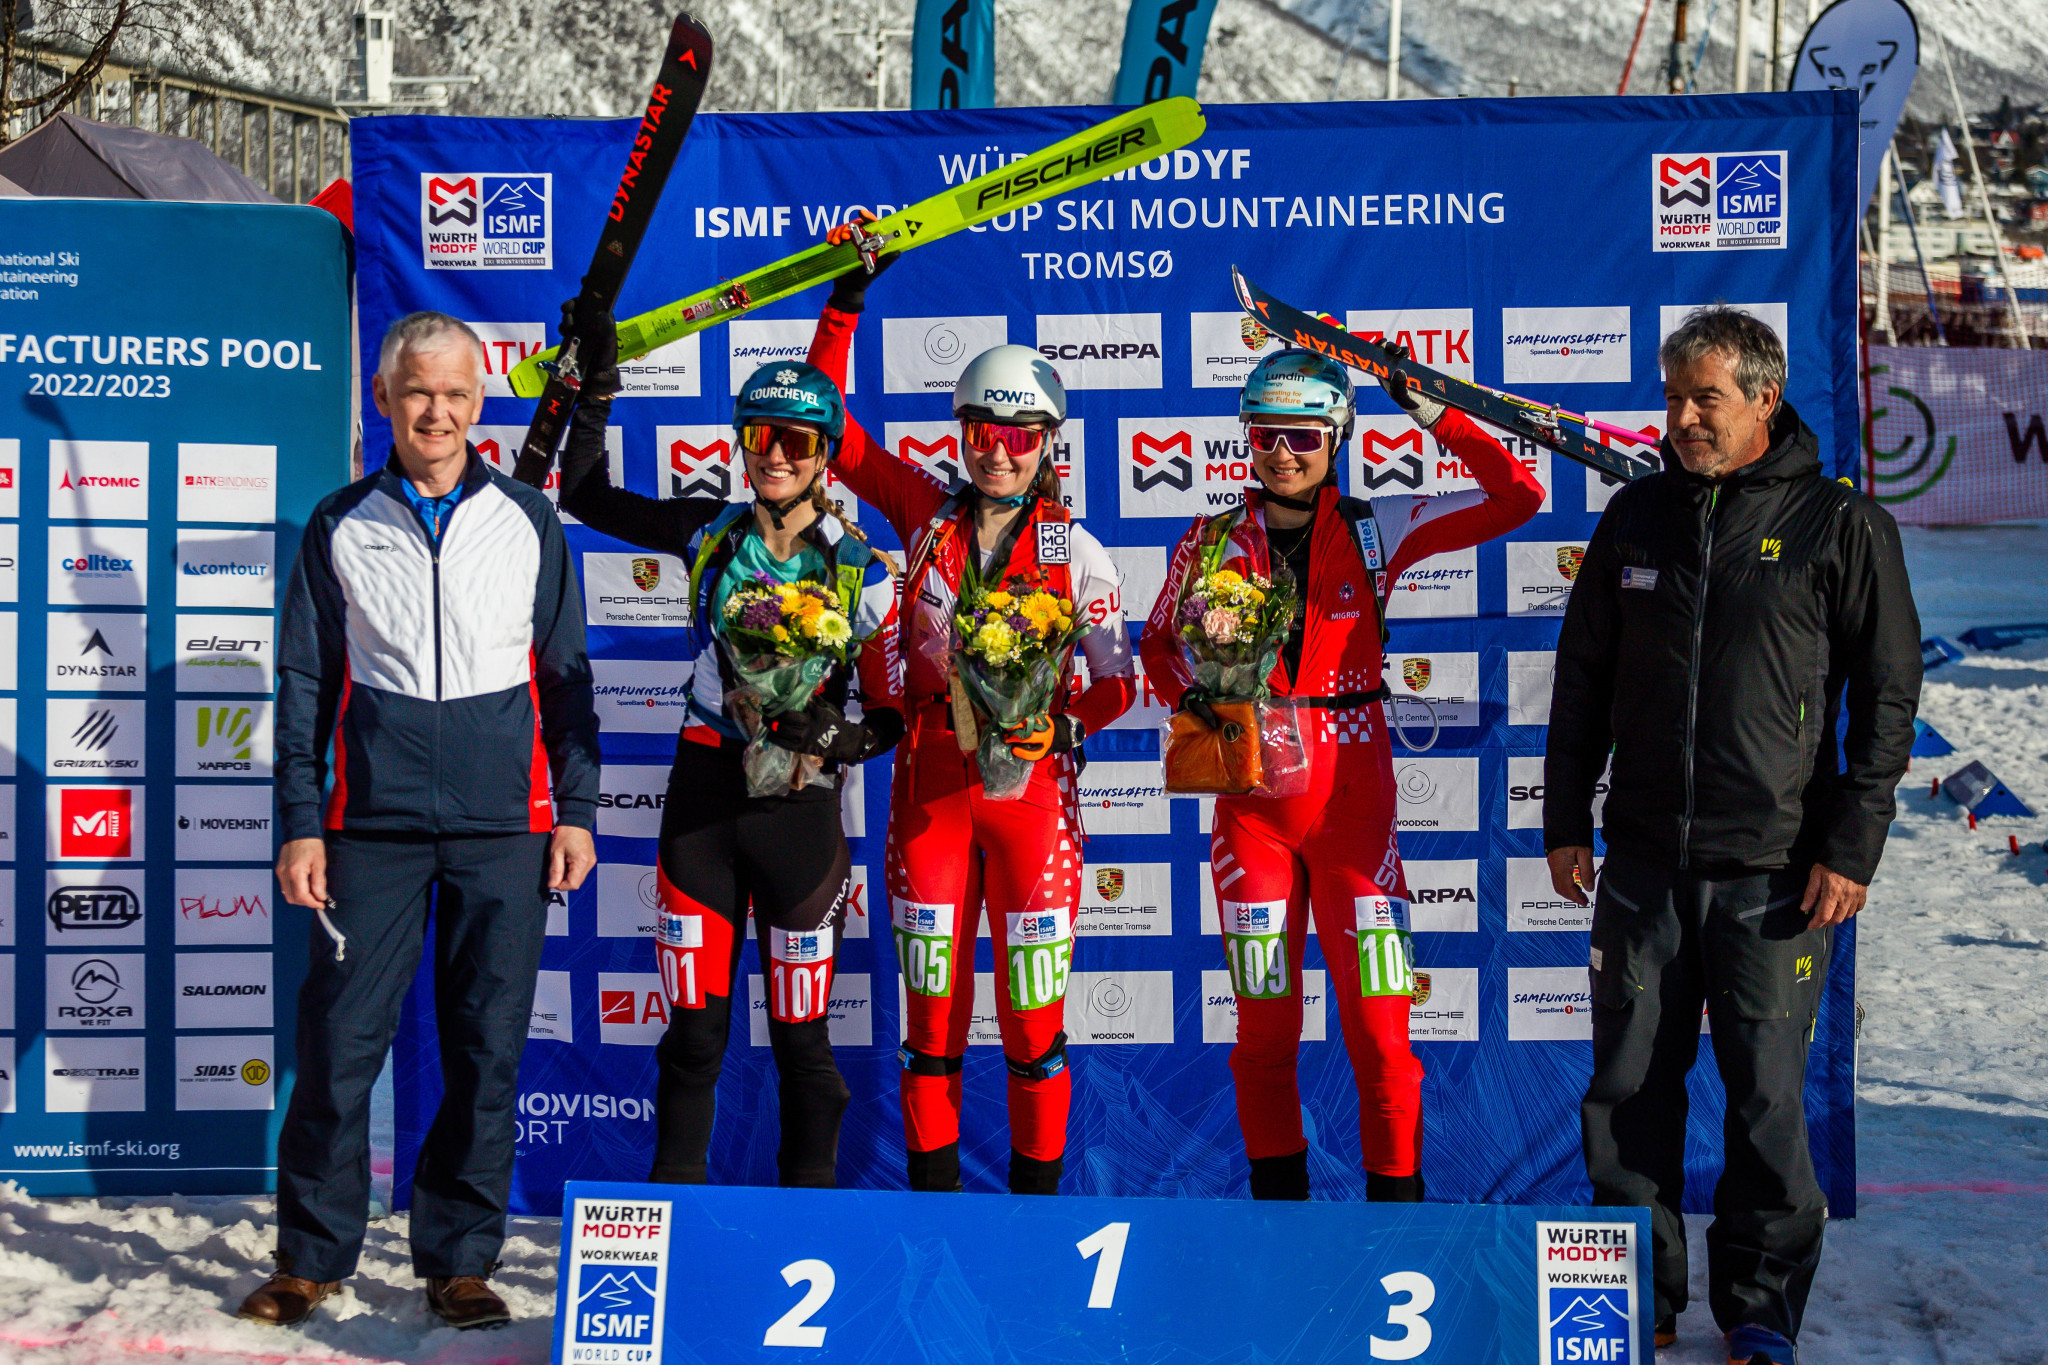 France's Emily Harrop, second from left, won the women's overall title as Switzerland's Marianne Fatton, centre, secured victory in Tromsø ©ISMF